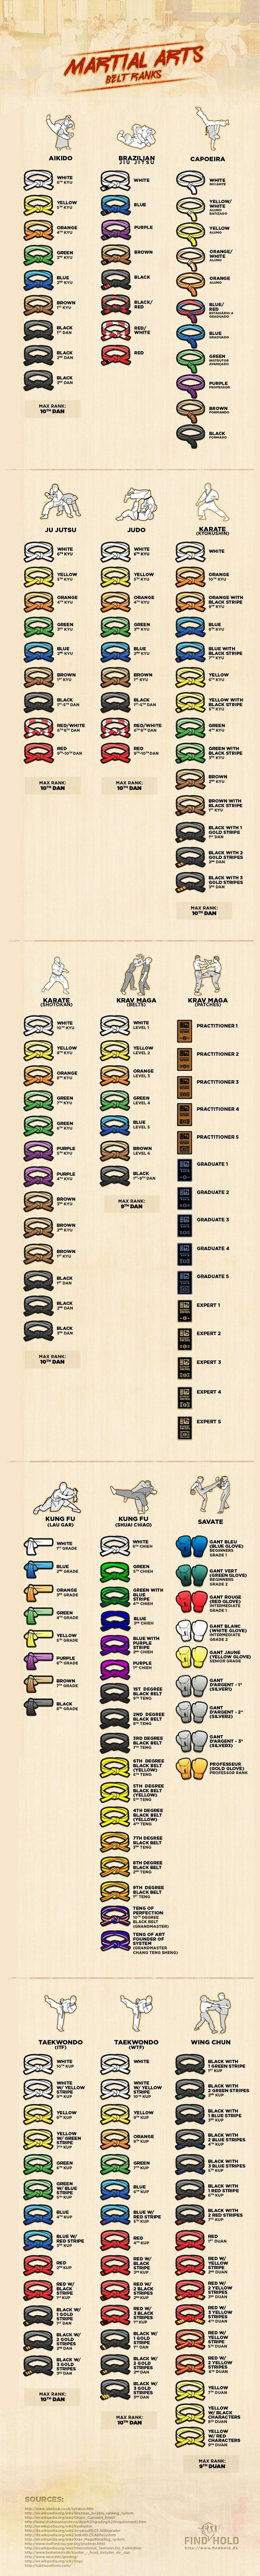 Martial Arts Belts in Order Infographic